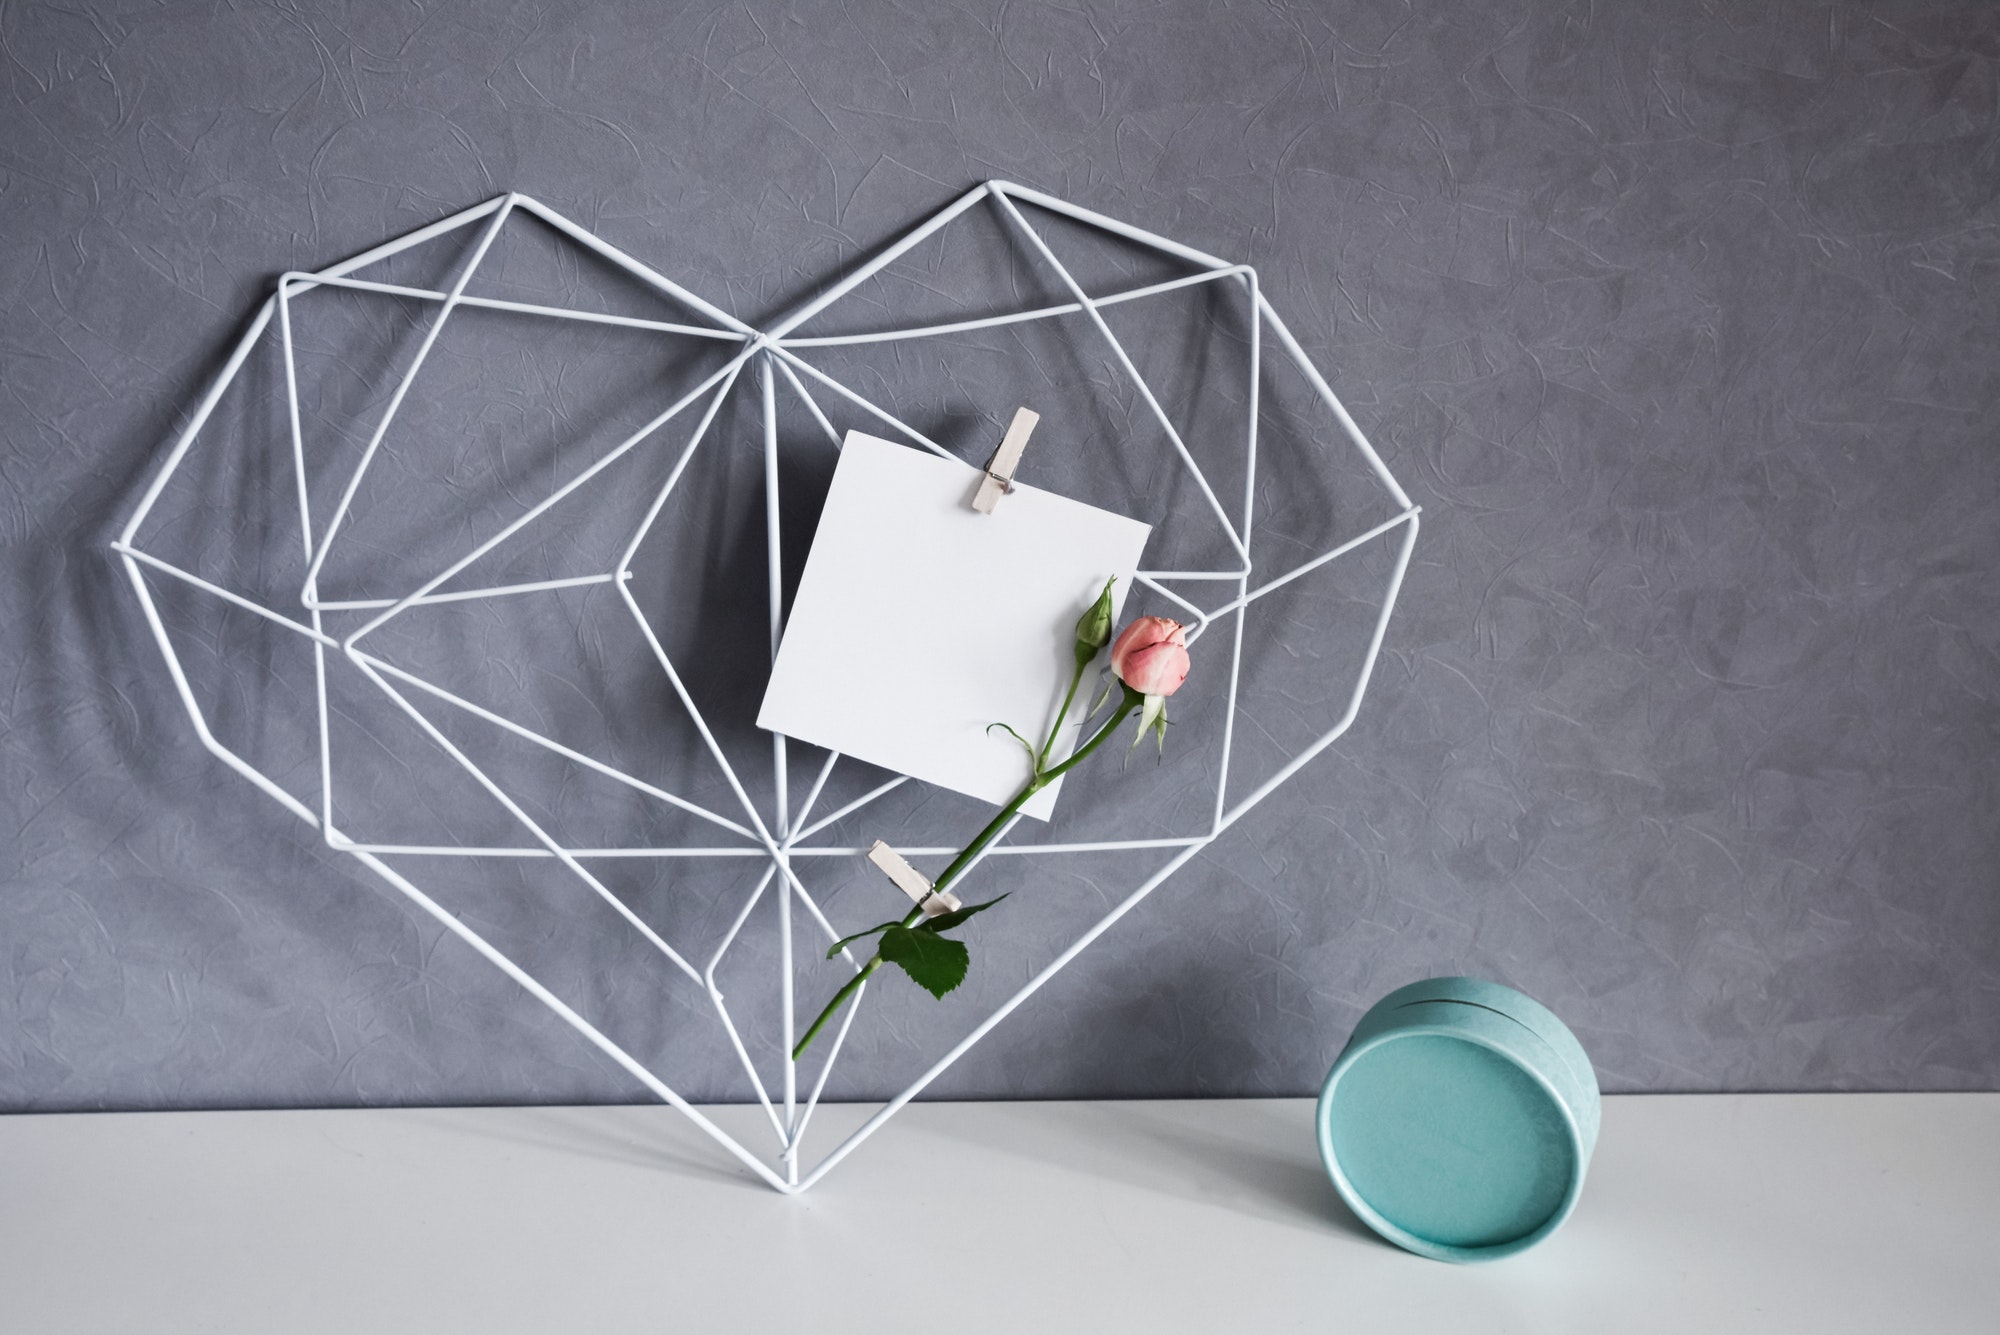 graphic-heart-of-polygons-with-note-rose-flower-gift-box-in-the-interior-valentine-s-day-concept.jpg